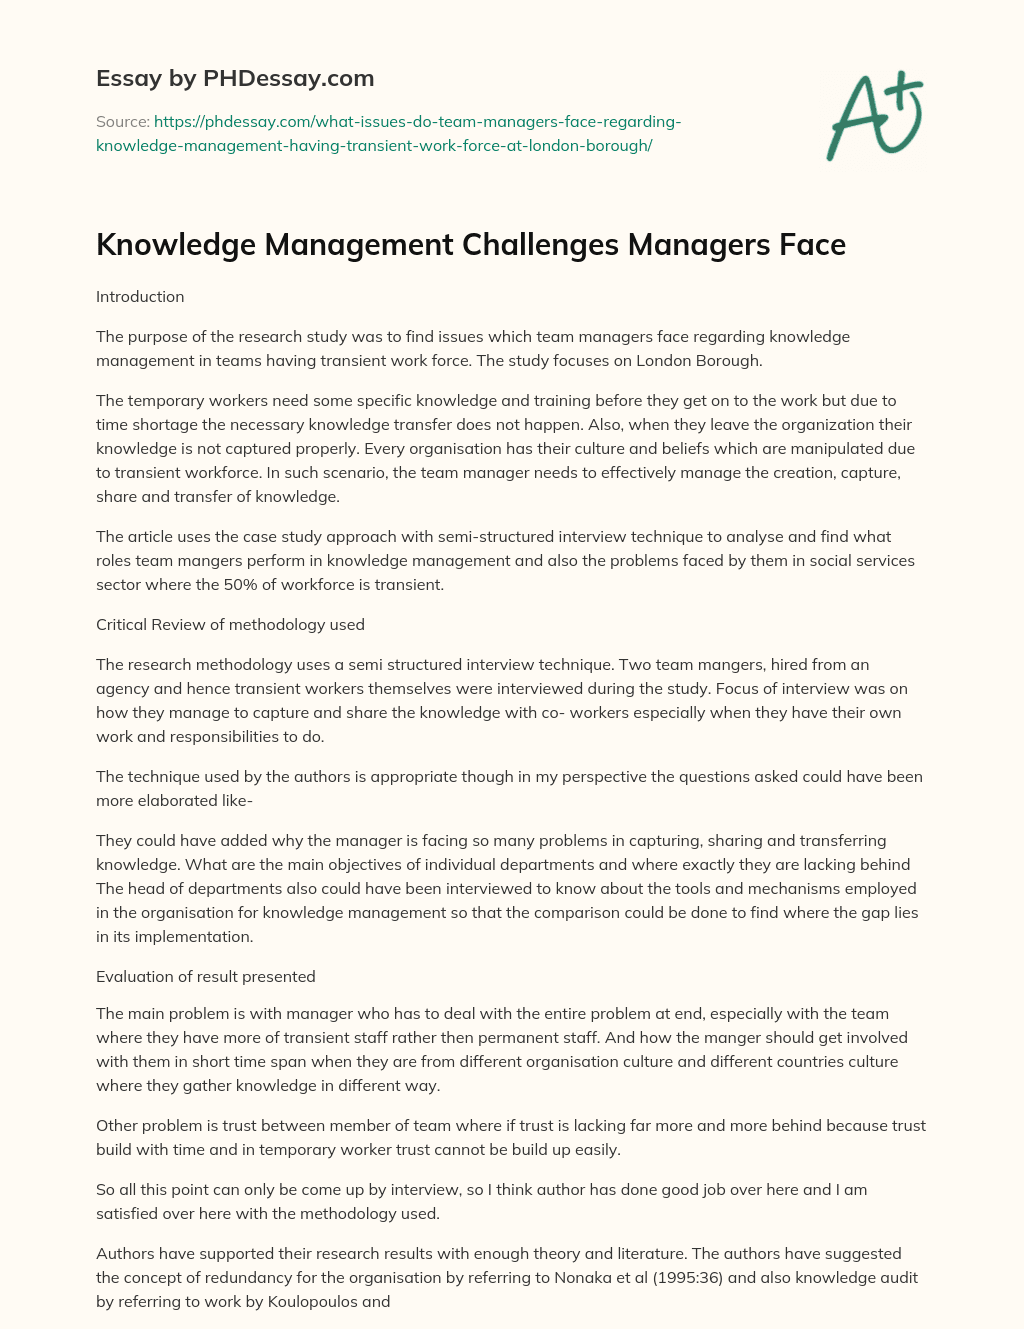 Knowledge Management Challenges Managers Face essay